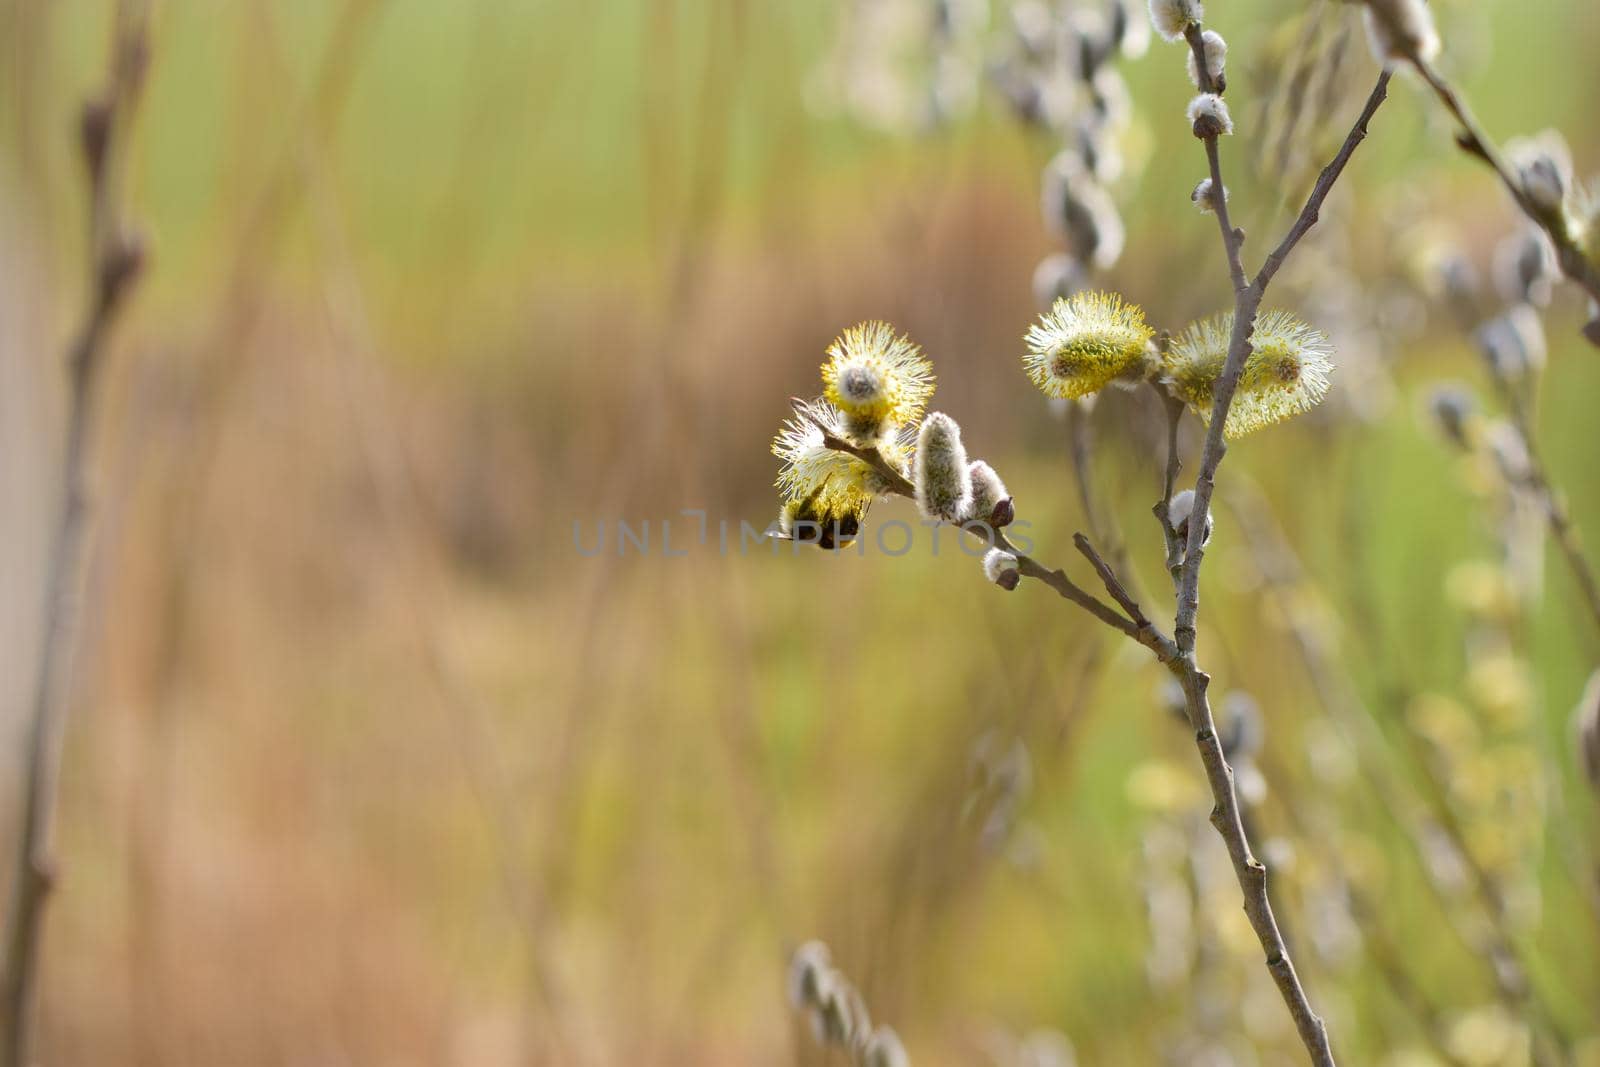 A Bee on a flowering salix against a blurry background